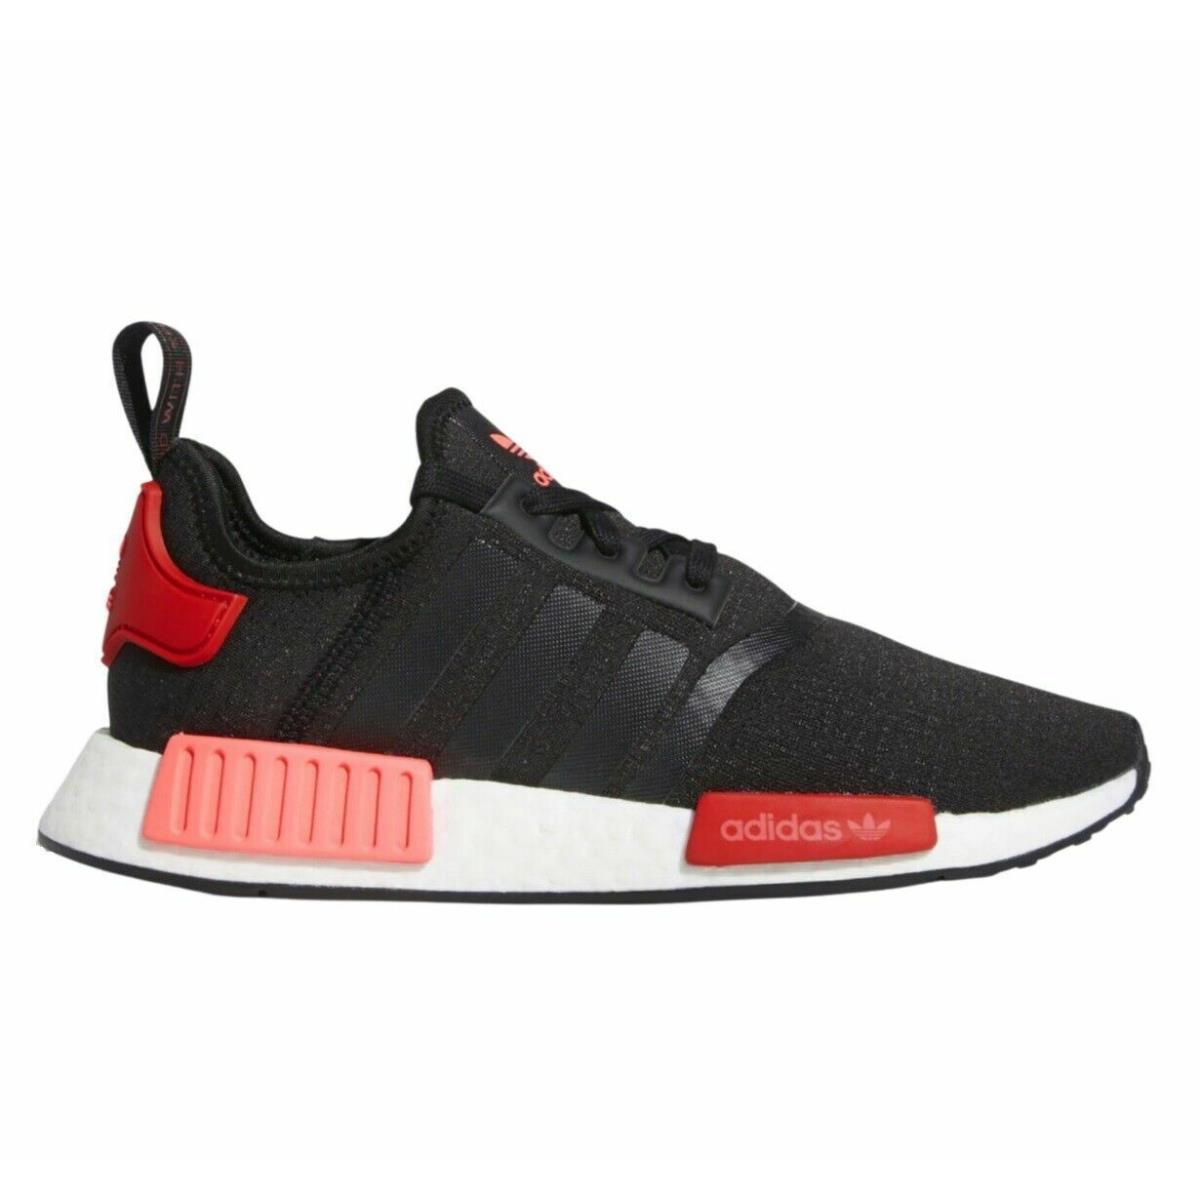 Adidas NMD_R1 Women`s Size 10.5 Black Scarlet / Flash Red EH0206 Boost